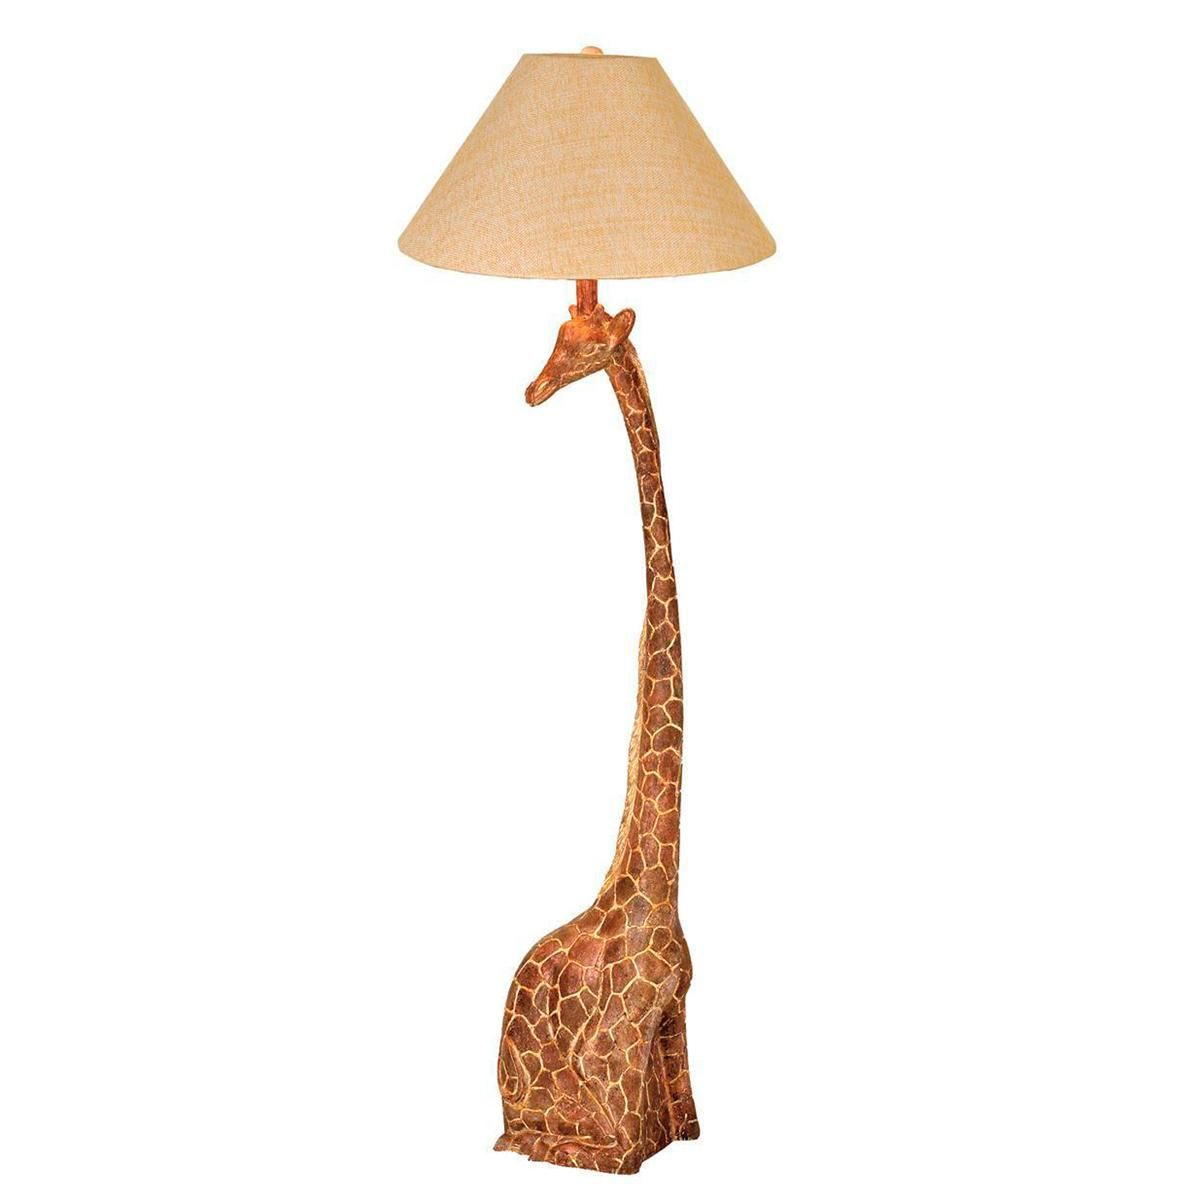 Giraffe Floor Lamp Cute For Nursery Bedroom Lamps Cool pertaining to size 1200 X 1200